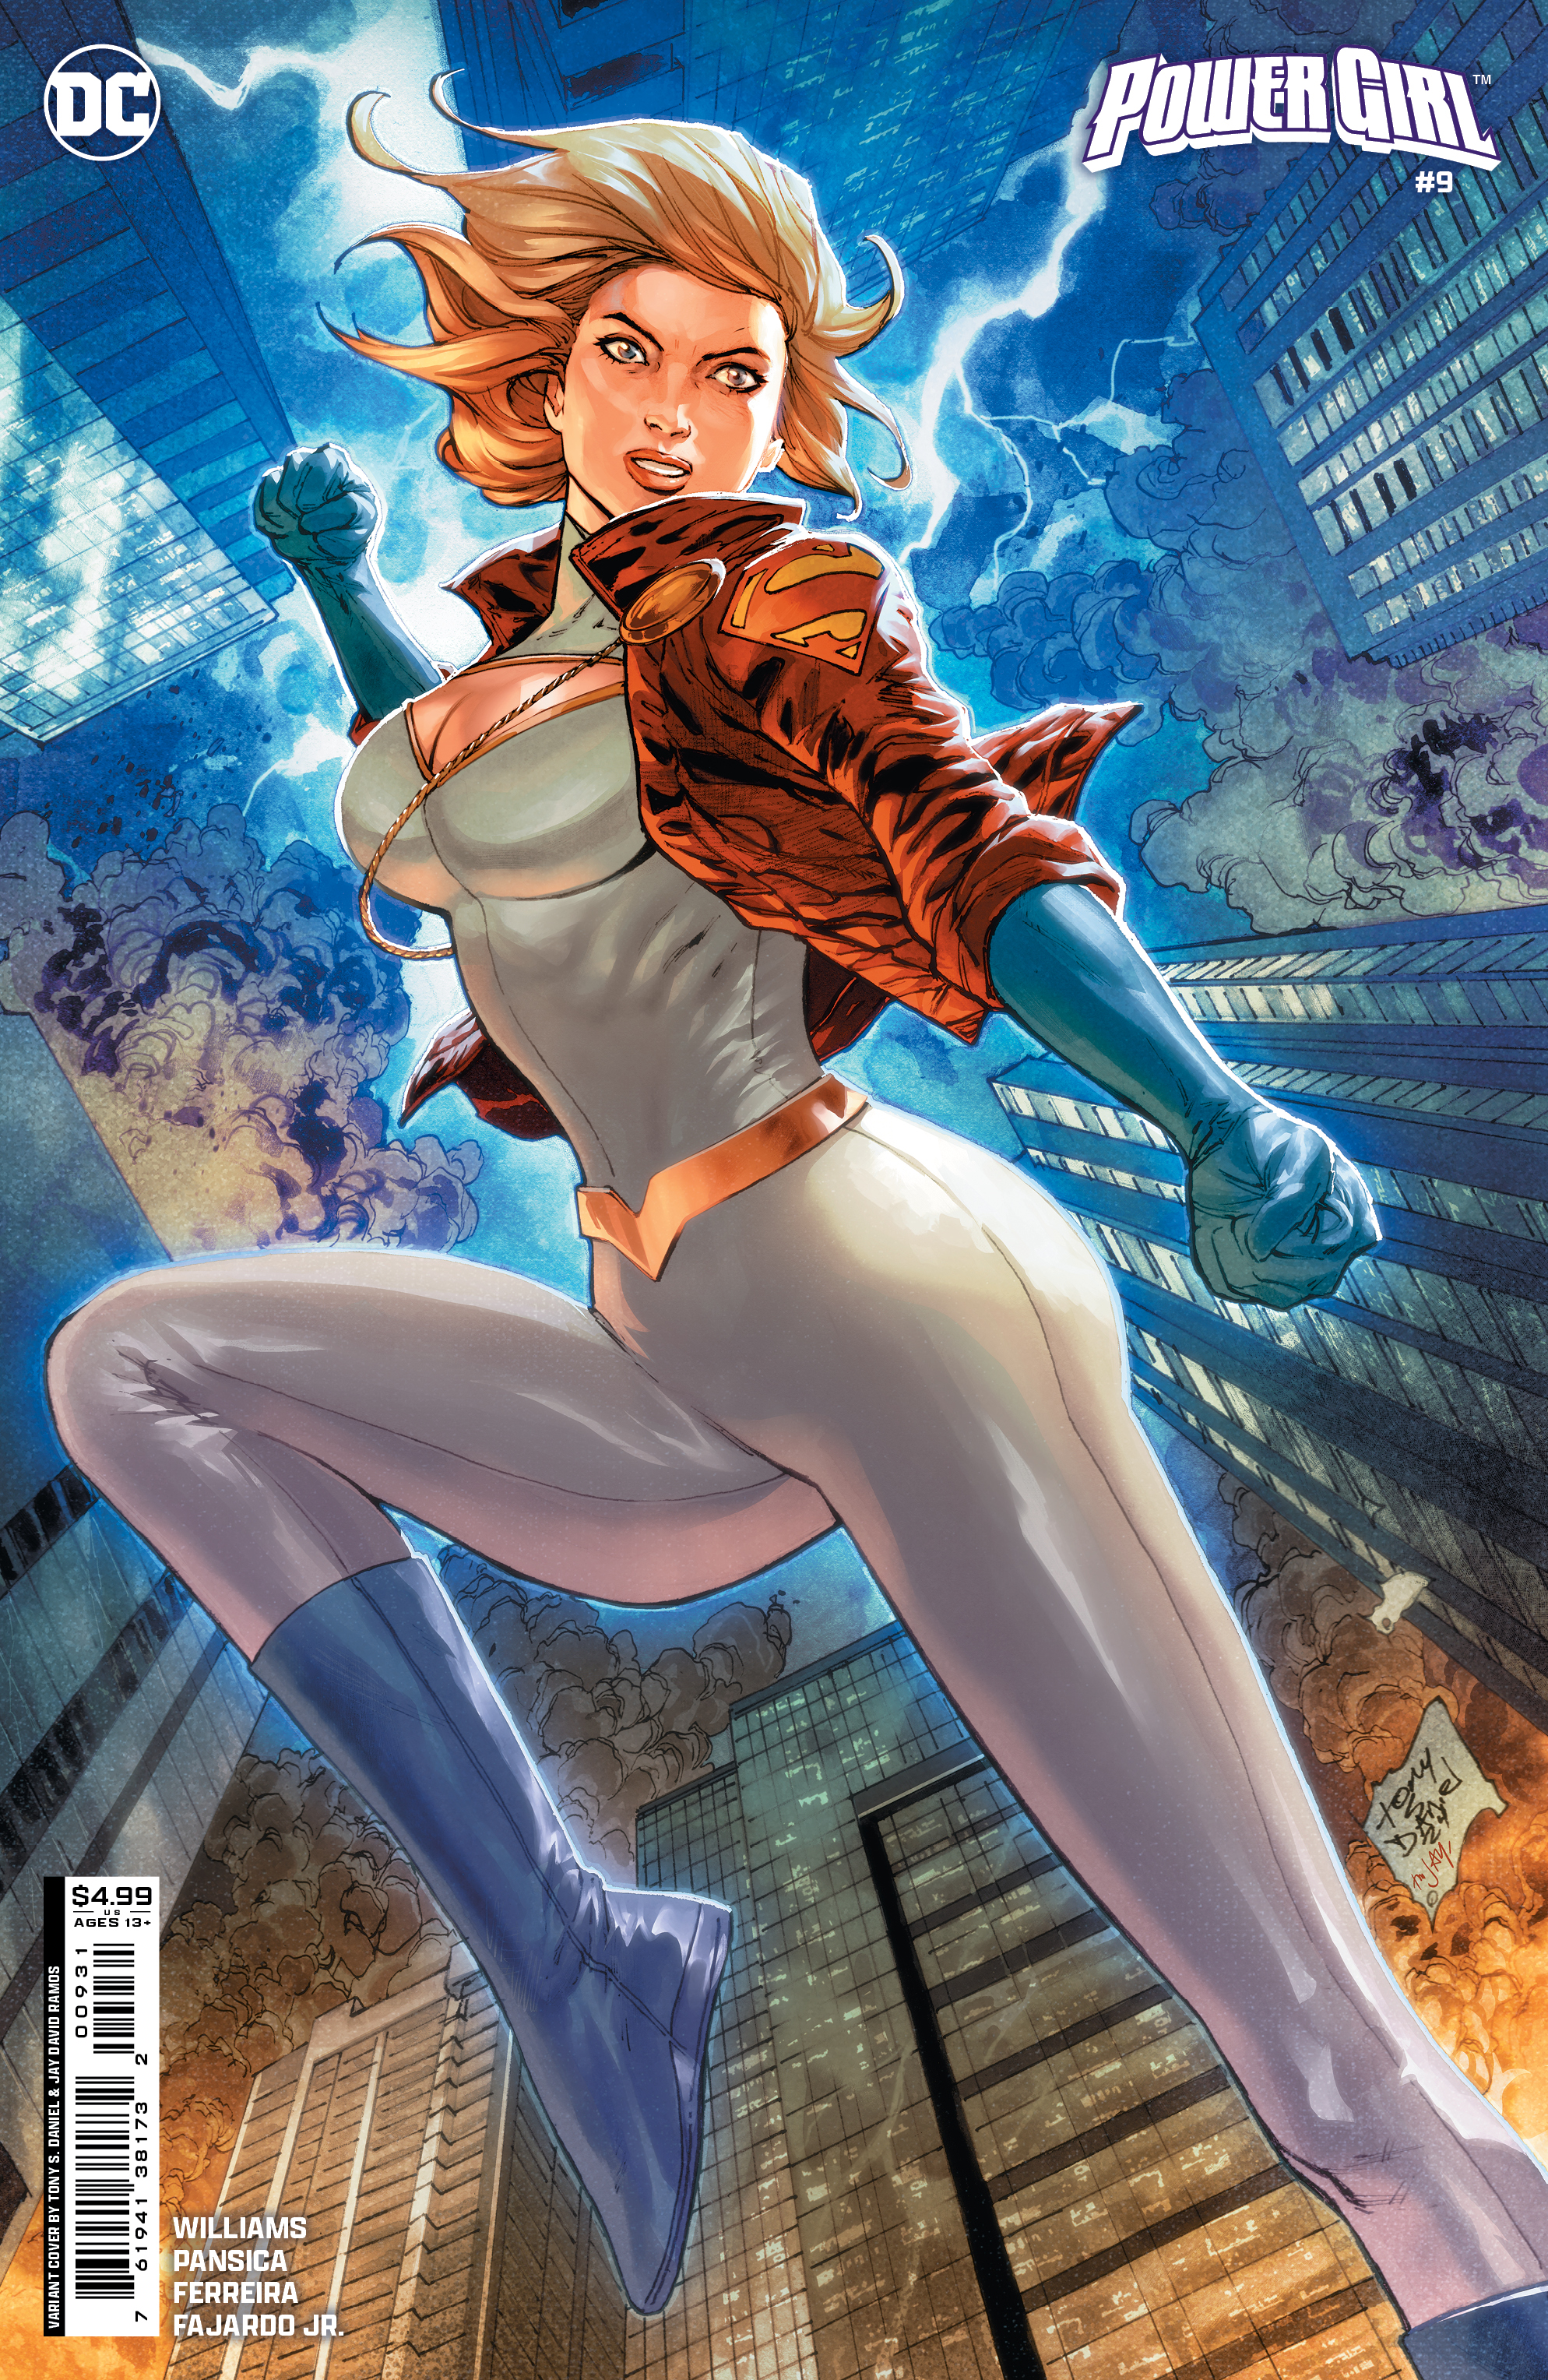 Covers from Power Girl #9